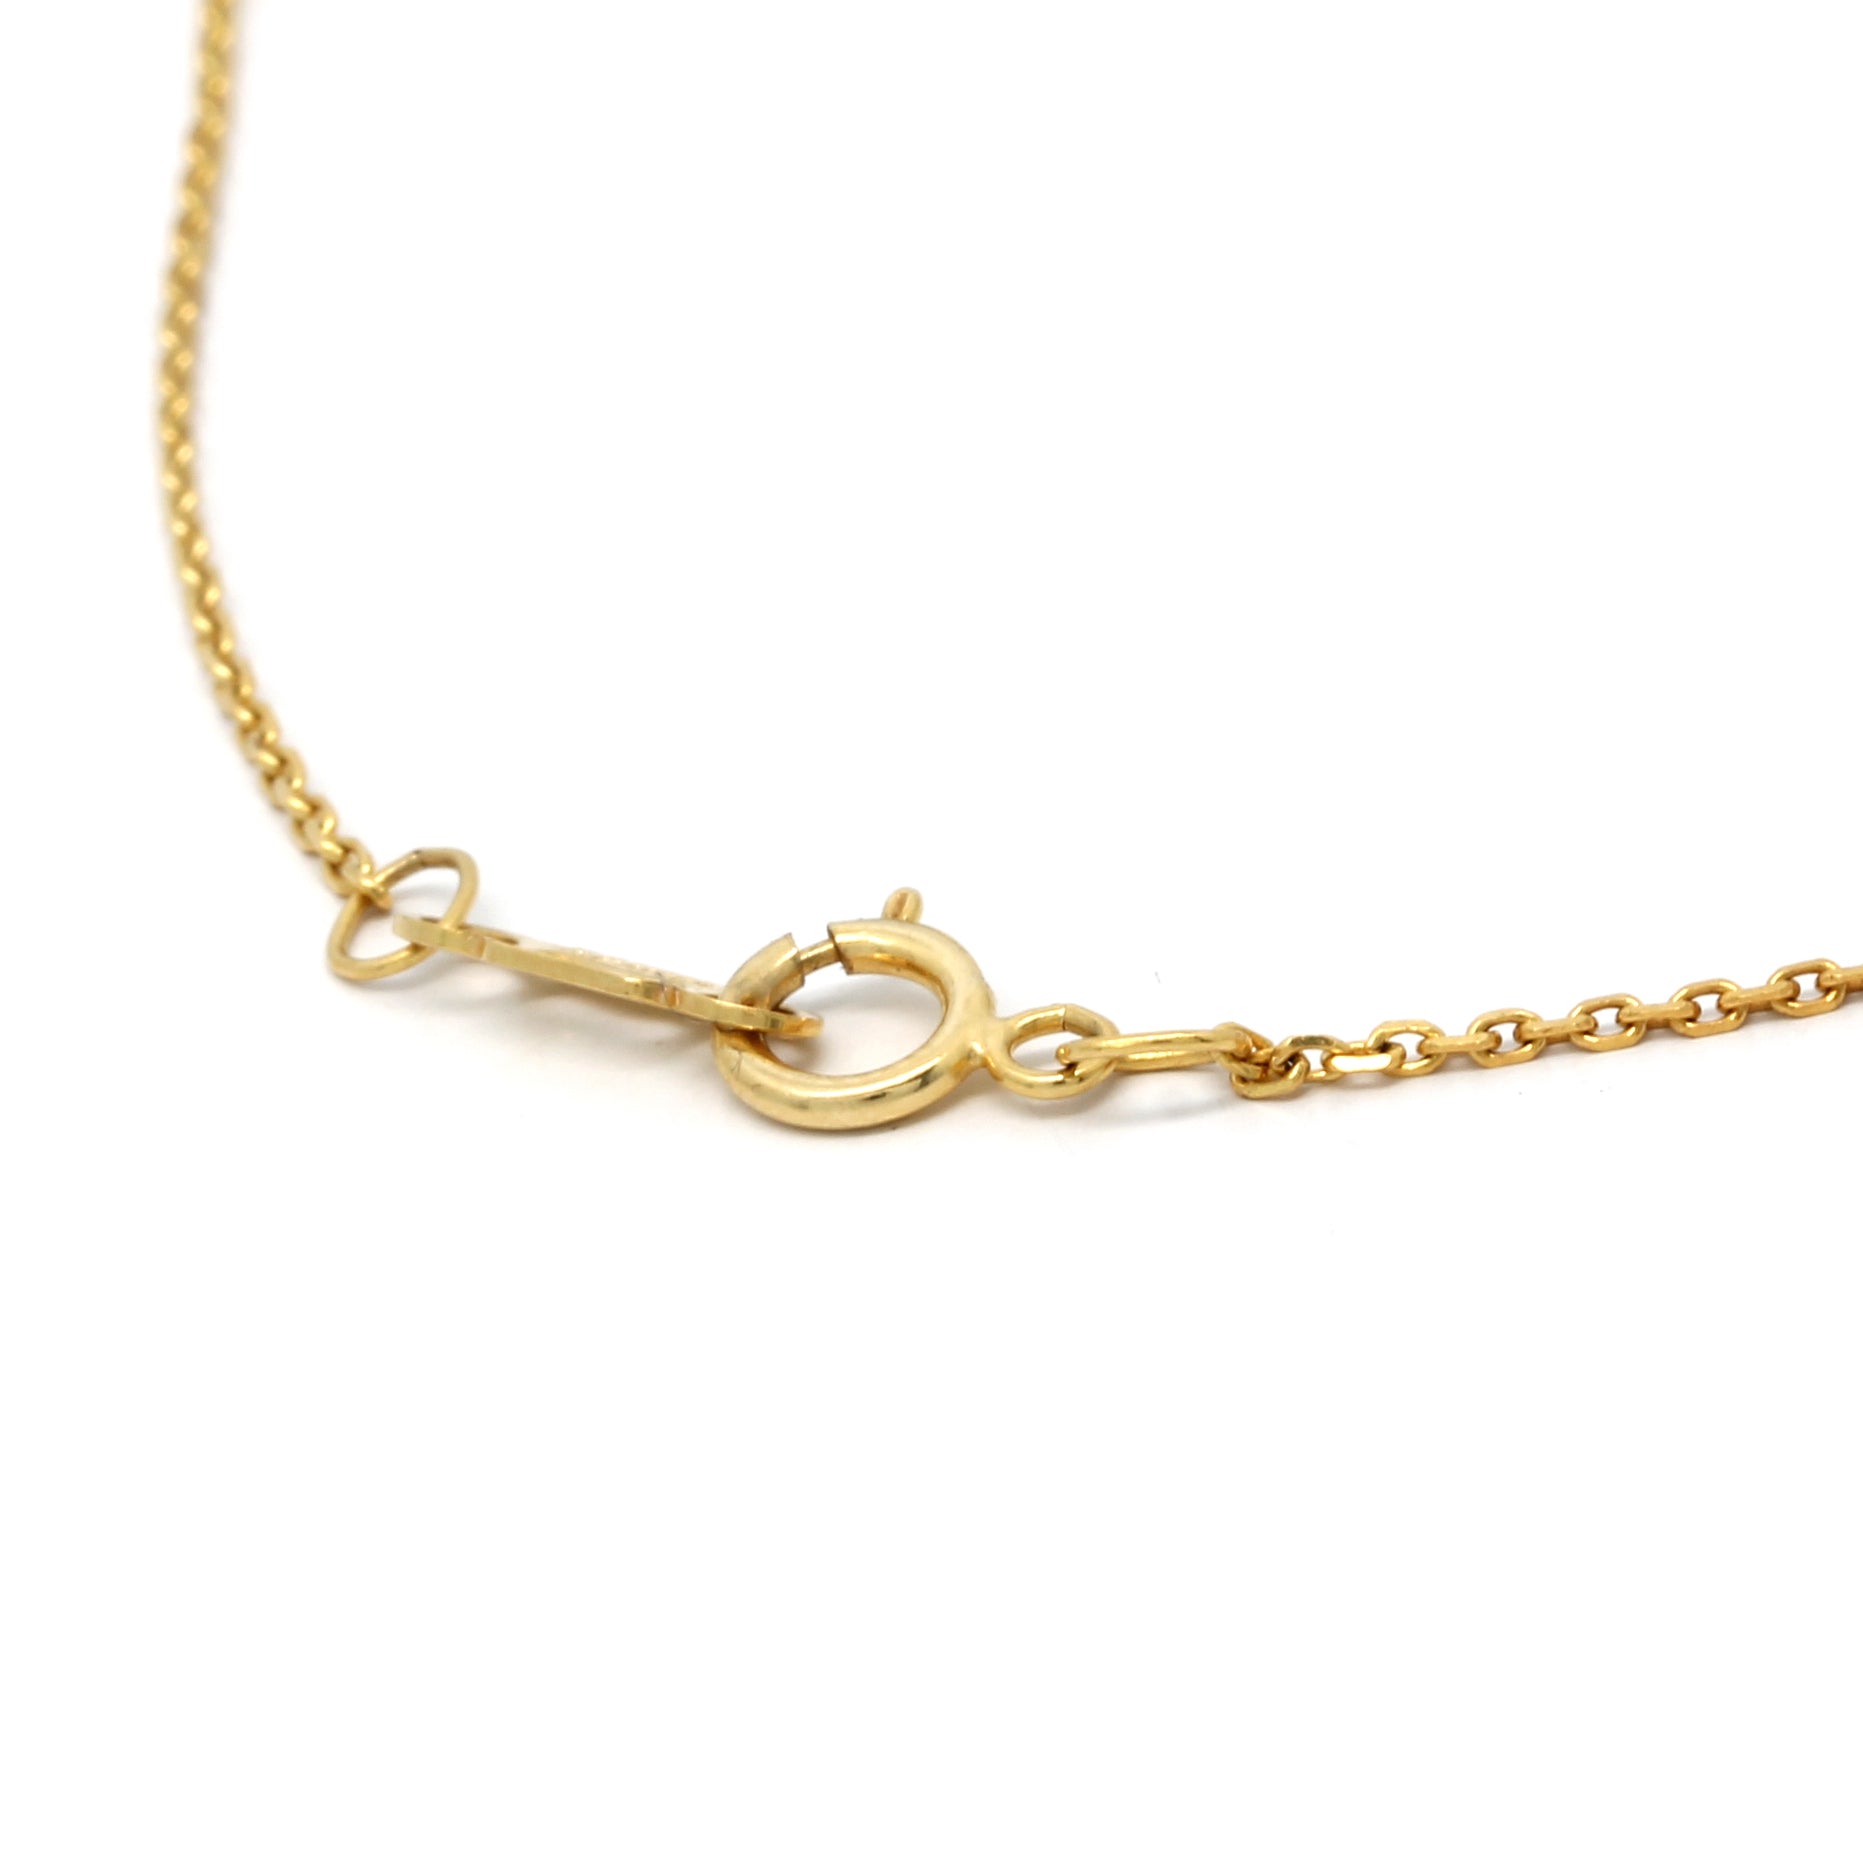 "Scorpius (Oct 23th - Nov 21st)" 14K Yellow Gold Pendant and Chain with Cortez Keshi Pearls